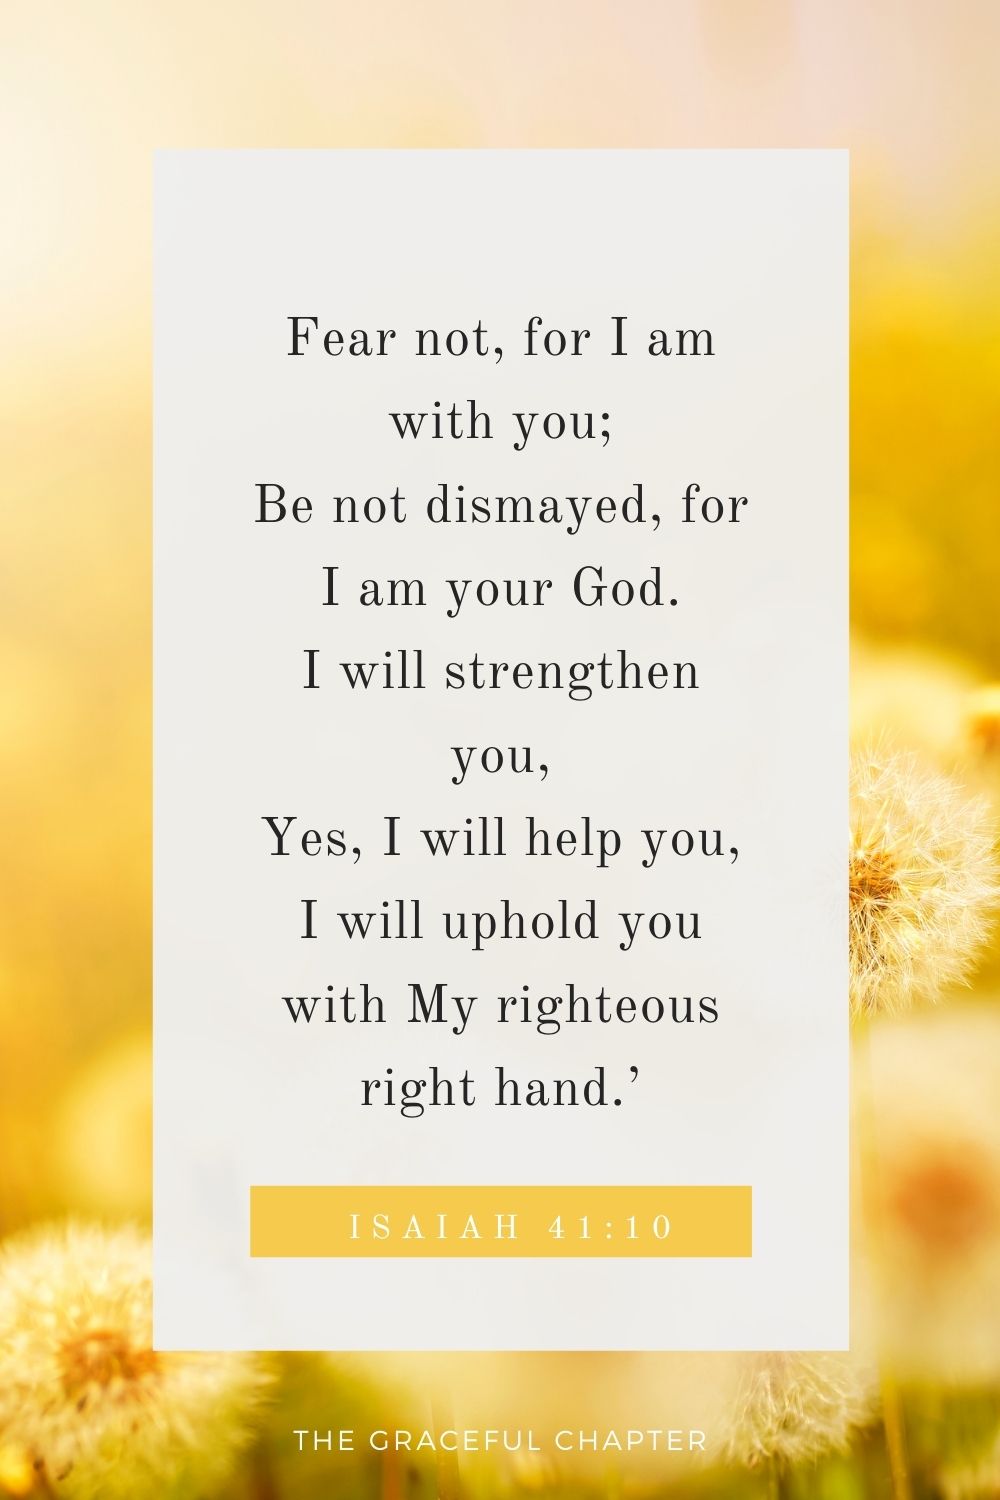 Fear not, for I am with you; Be not dismayed, for I am your God. I will strengthen you, Yes, I will help you, I will uphold you with My righteous right hand.’ Isaiah 41:10